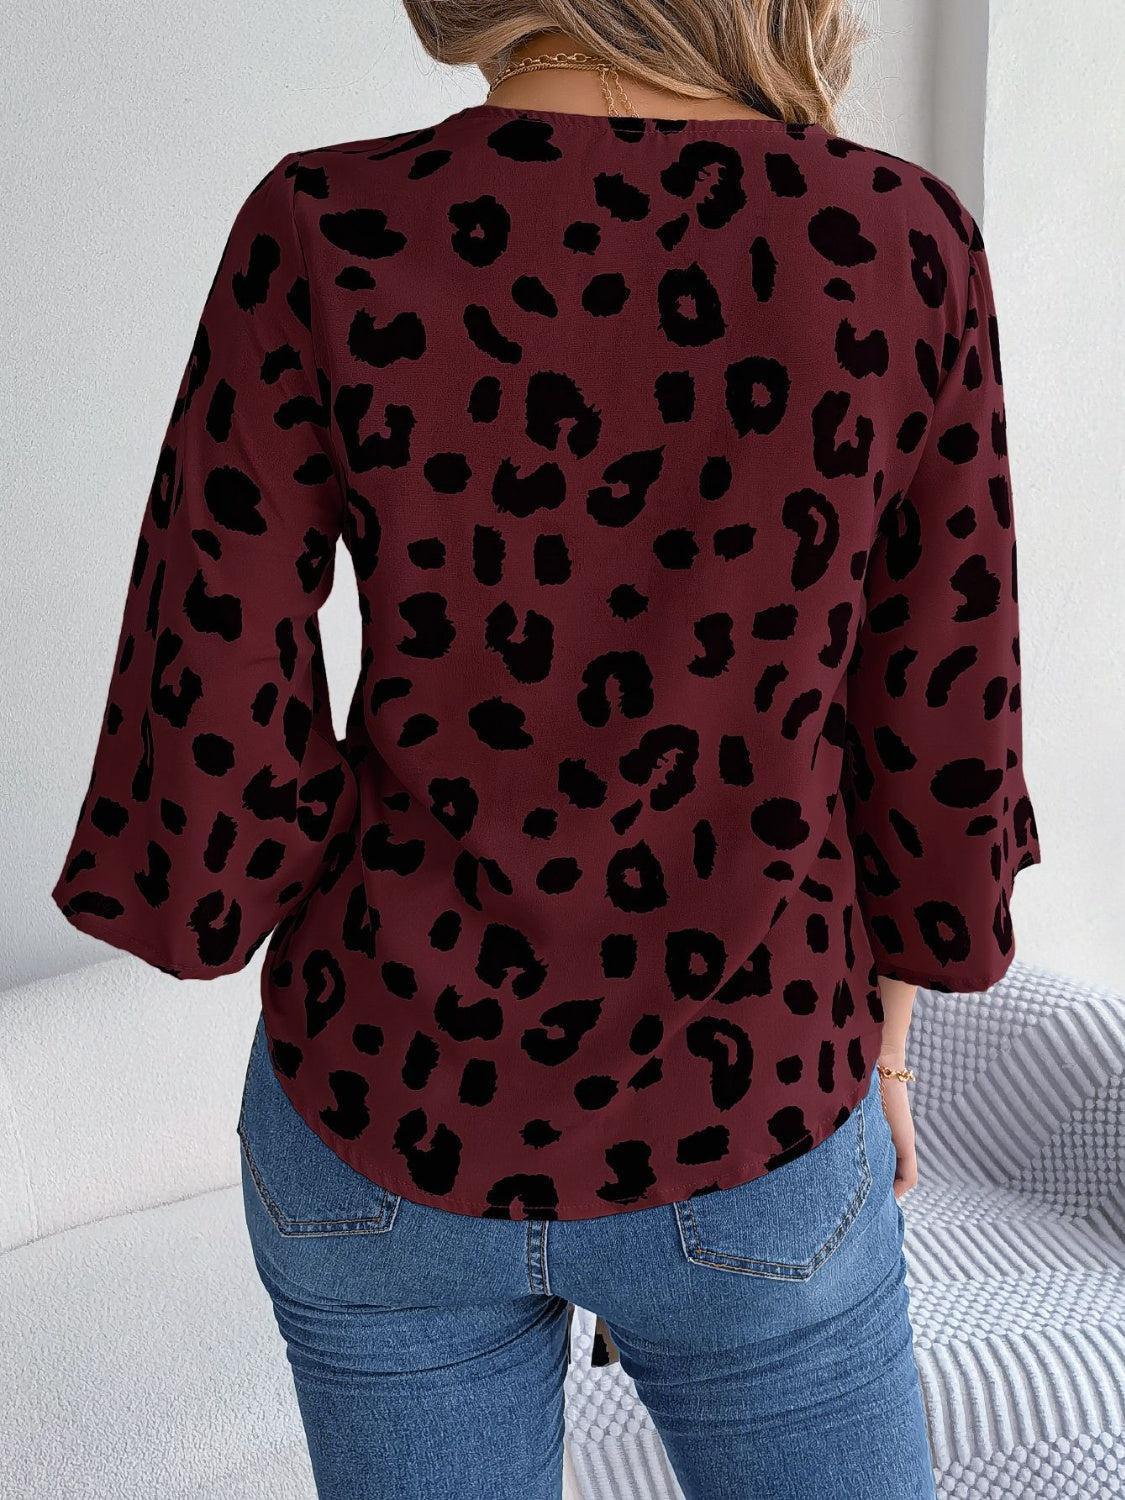 a woman wearing a red and black top with a leopard print